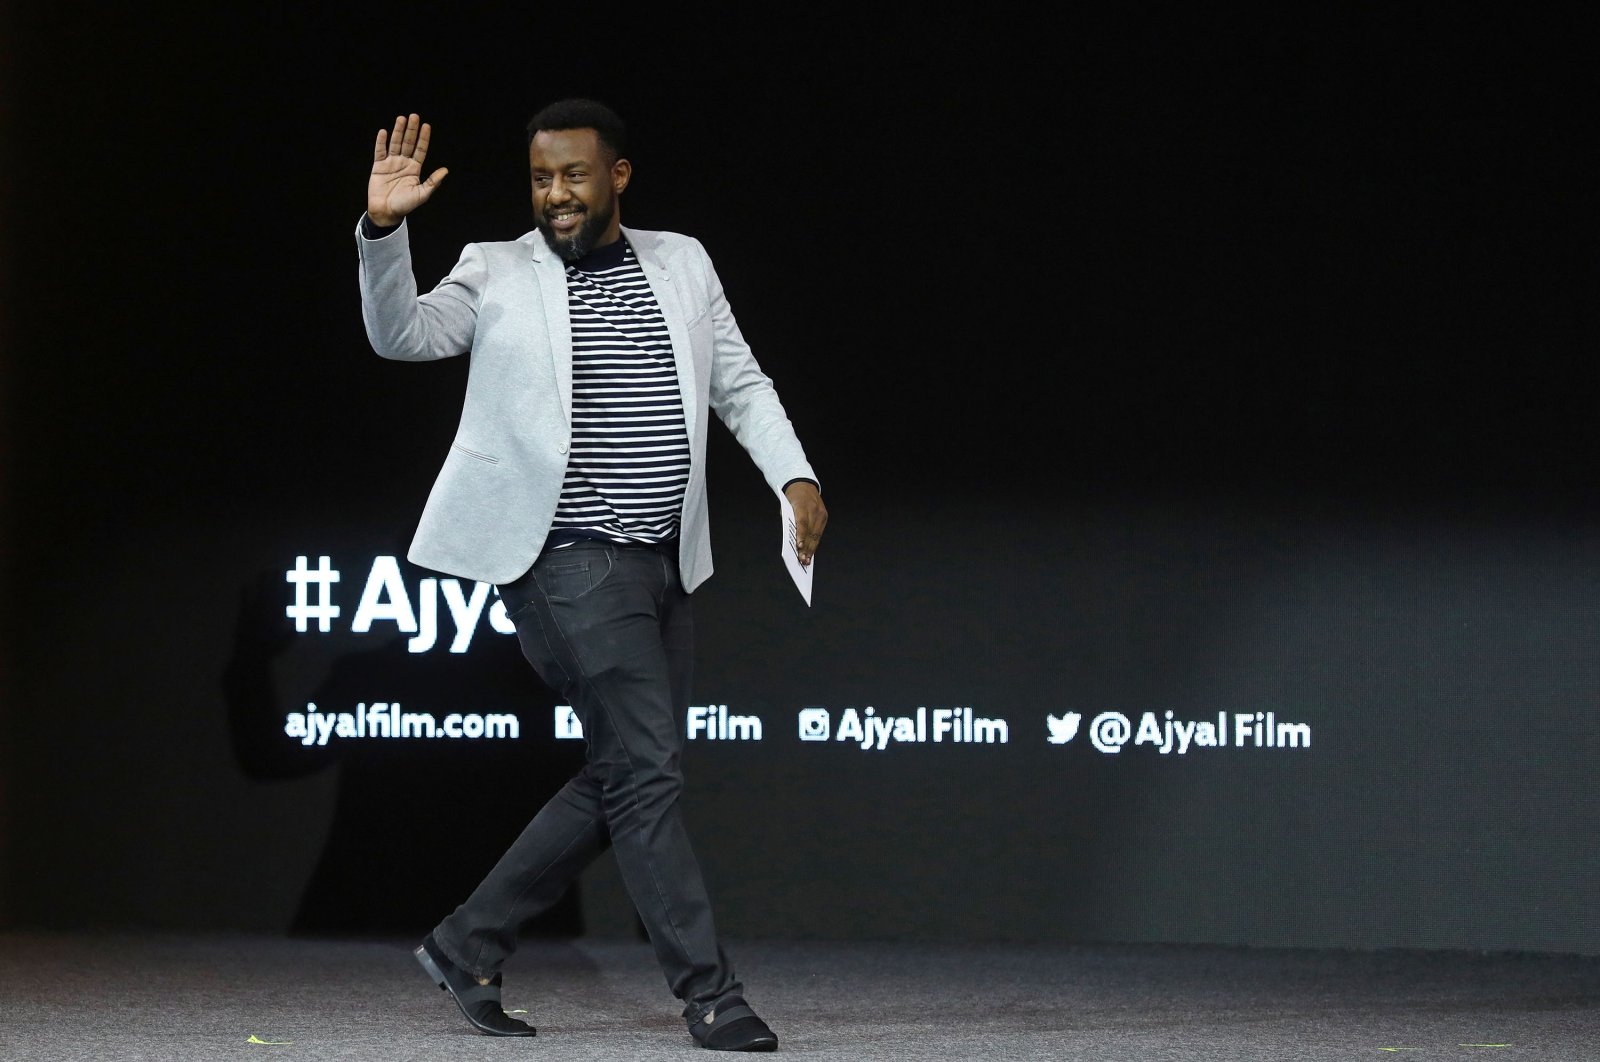 Director of 'You Will Die at Twenty' Amjad Abu Alala on stage during the Award Ceremony on the final night of the Ajyal Film Festival on November 23, 2019 in Doha, Qatar. (Getty Images)